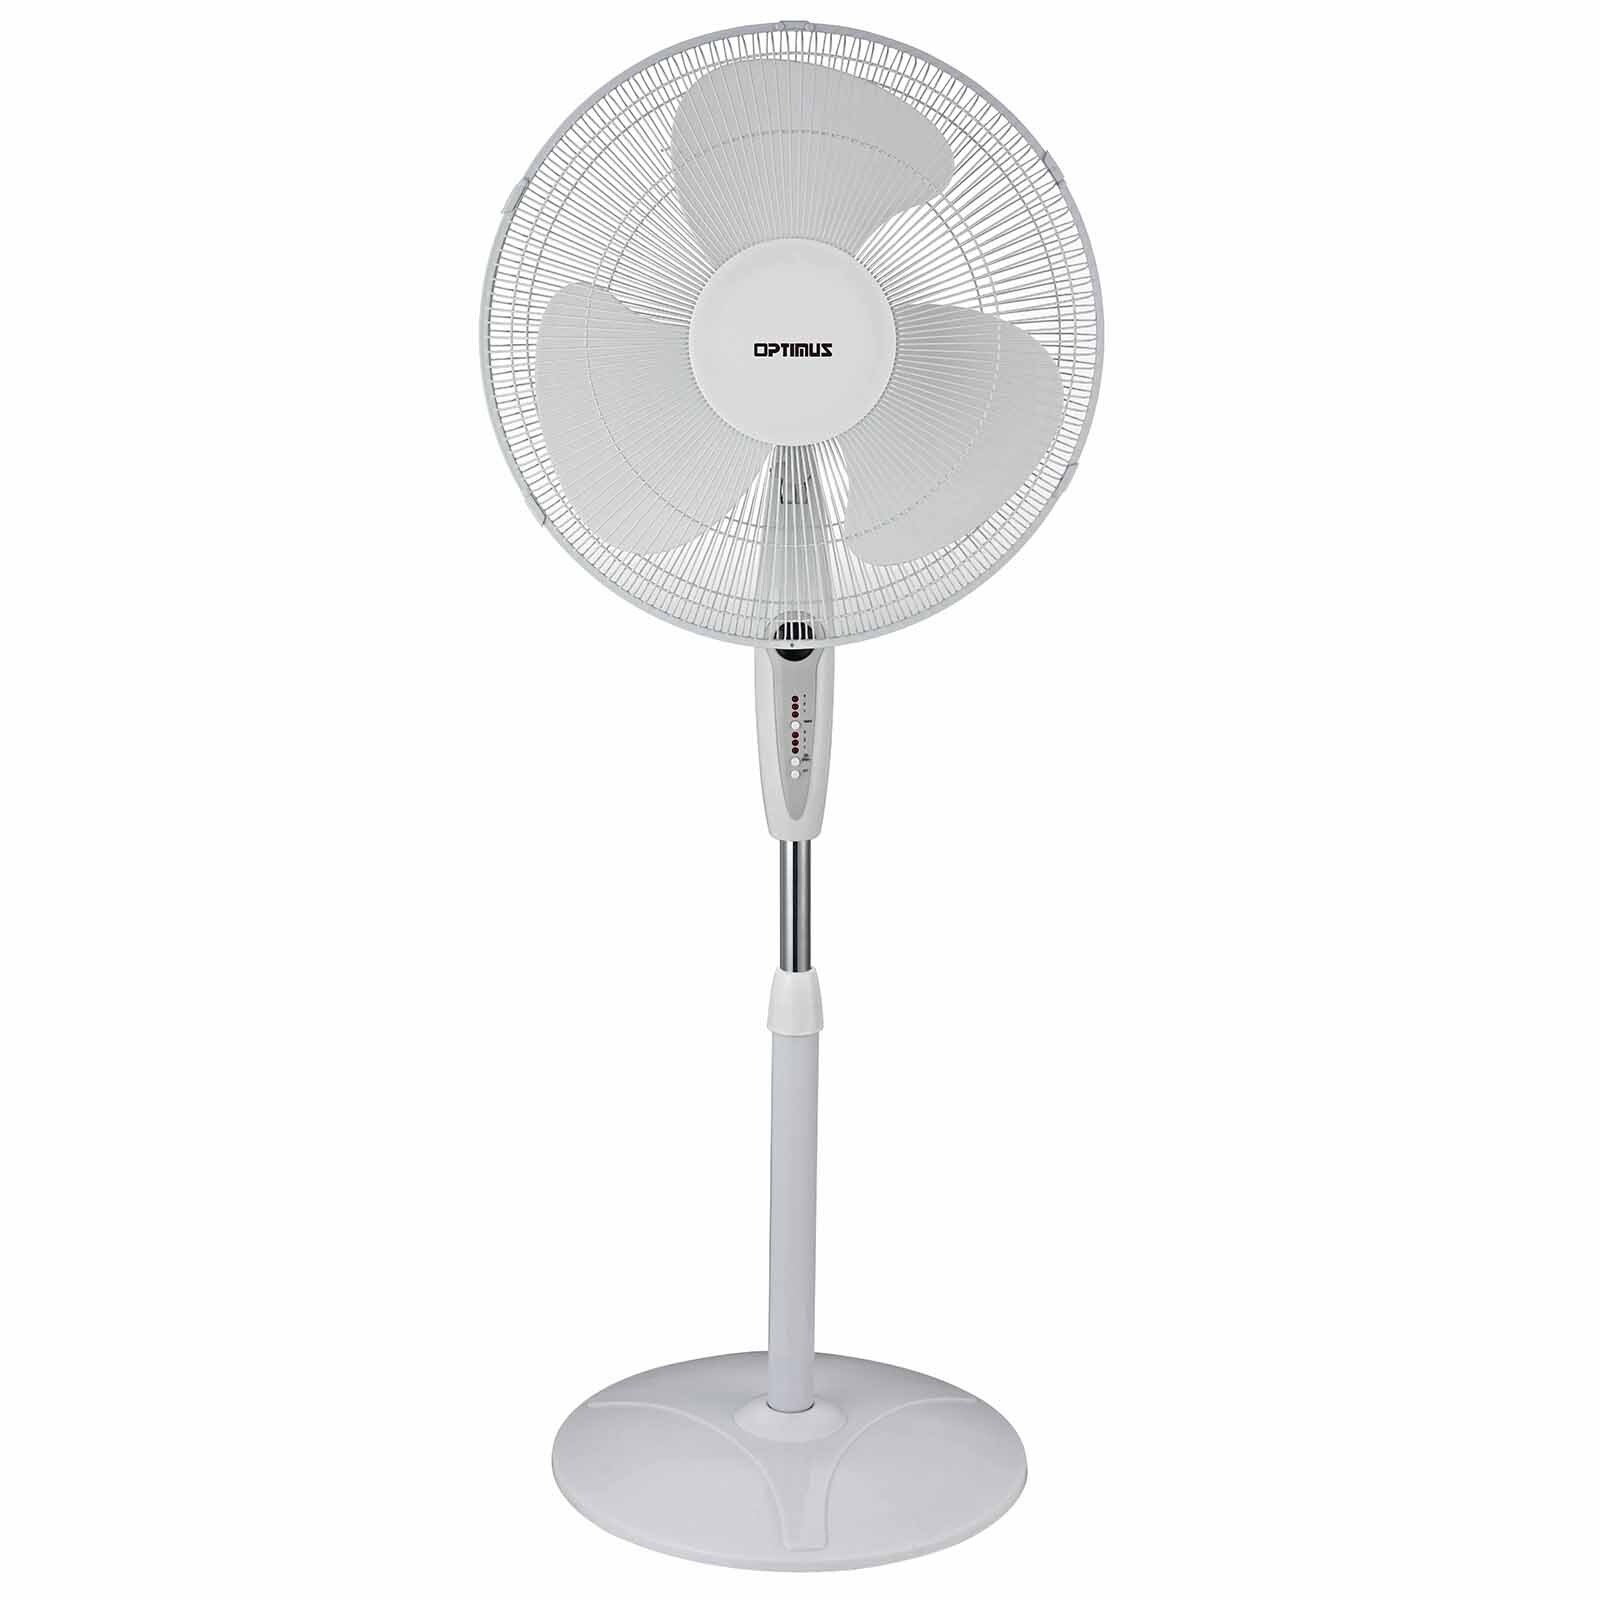 https://ak1.ostkcdn.com/images/products/is/images/direct/05a61ffe5e1ed9f2d0ec4b5c6fa38dc28ec6b209/Optimus-16-in.-Oscillating-Stand-Fan-with-Remote-Control.jpg